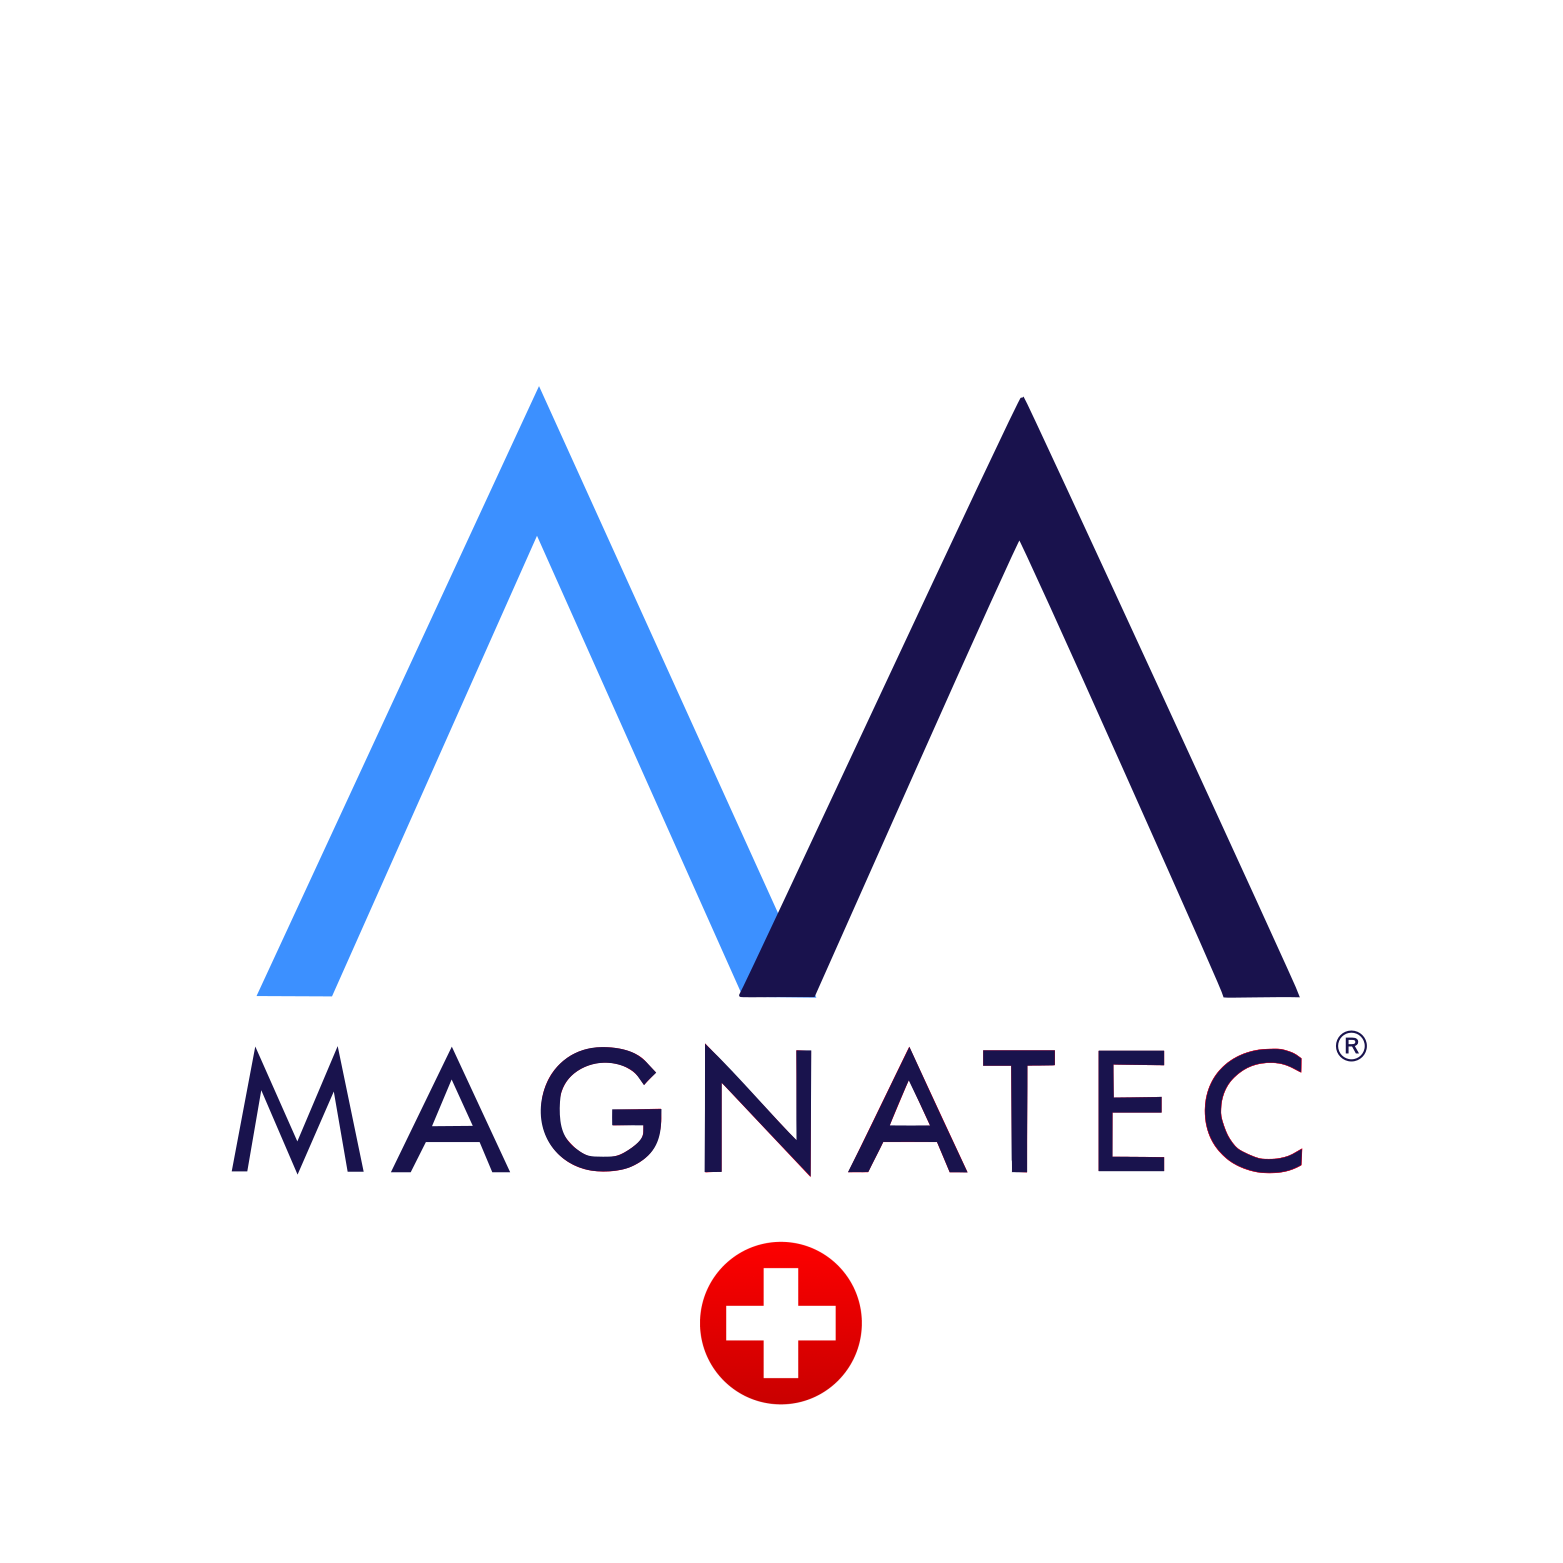 A logo with the word "MAGNATEC" in a bold